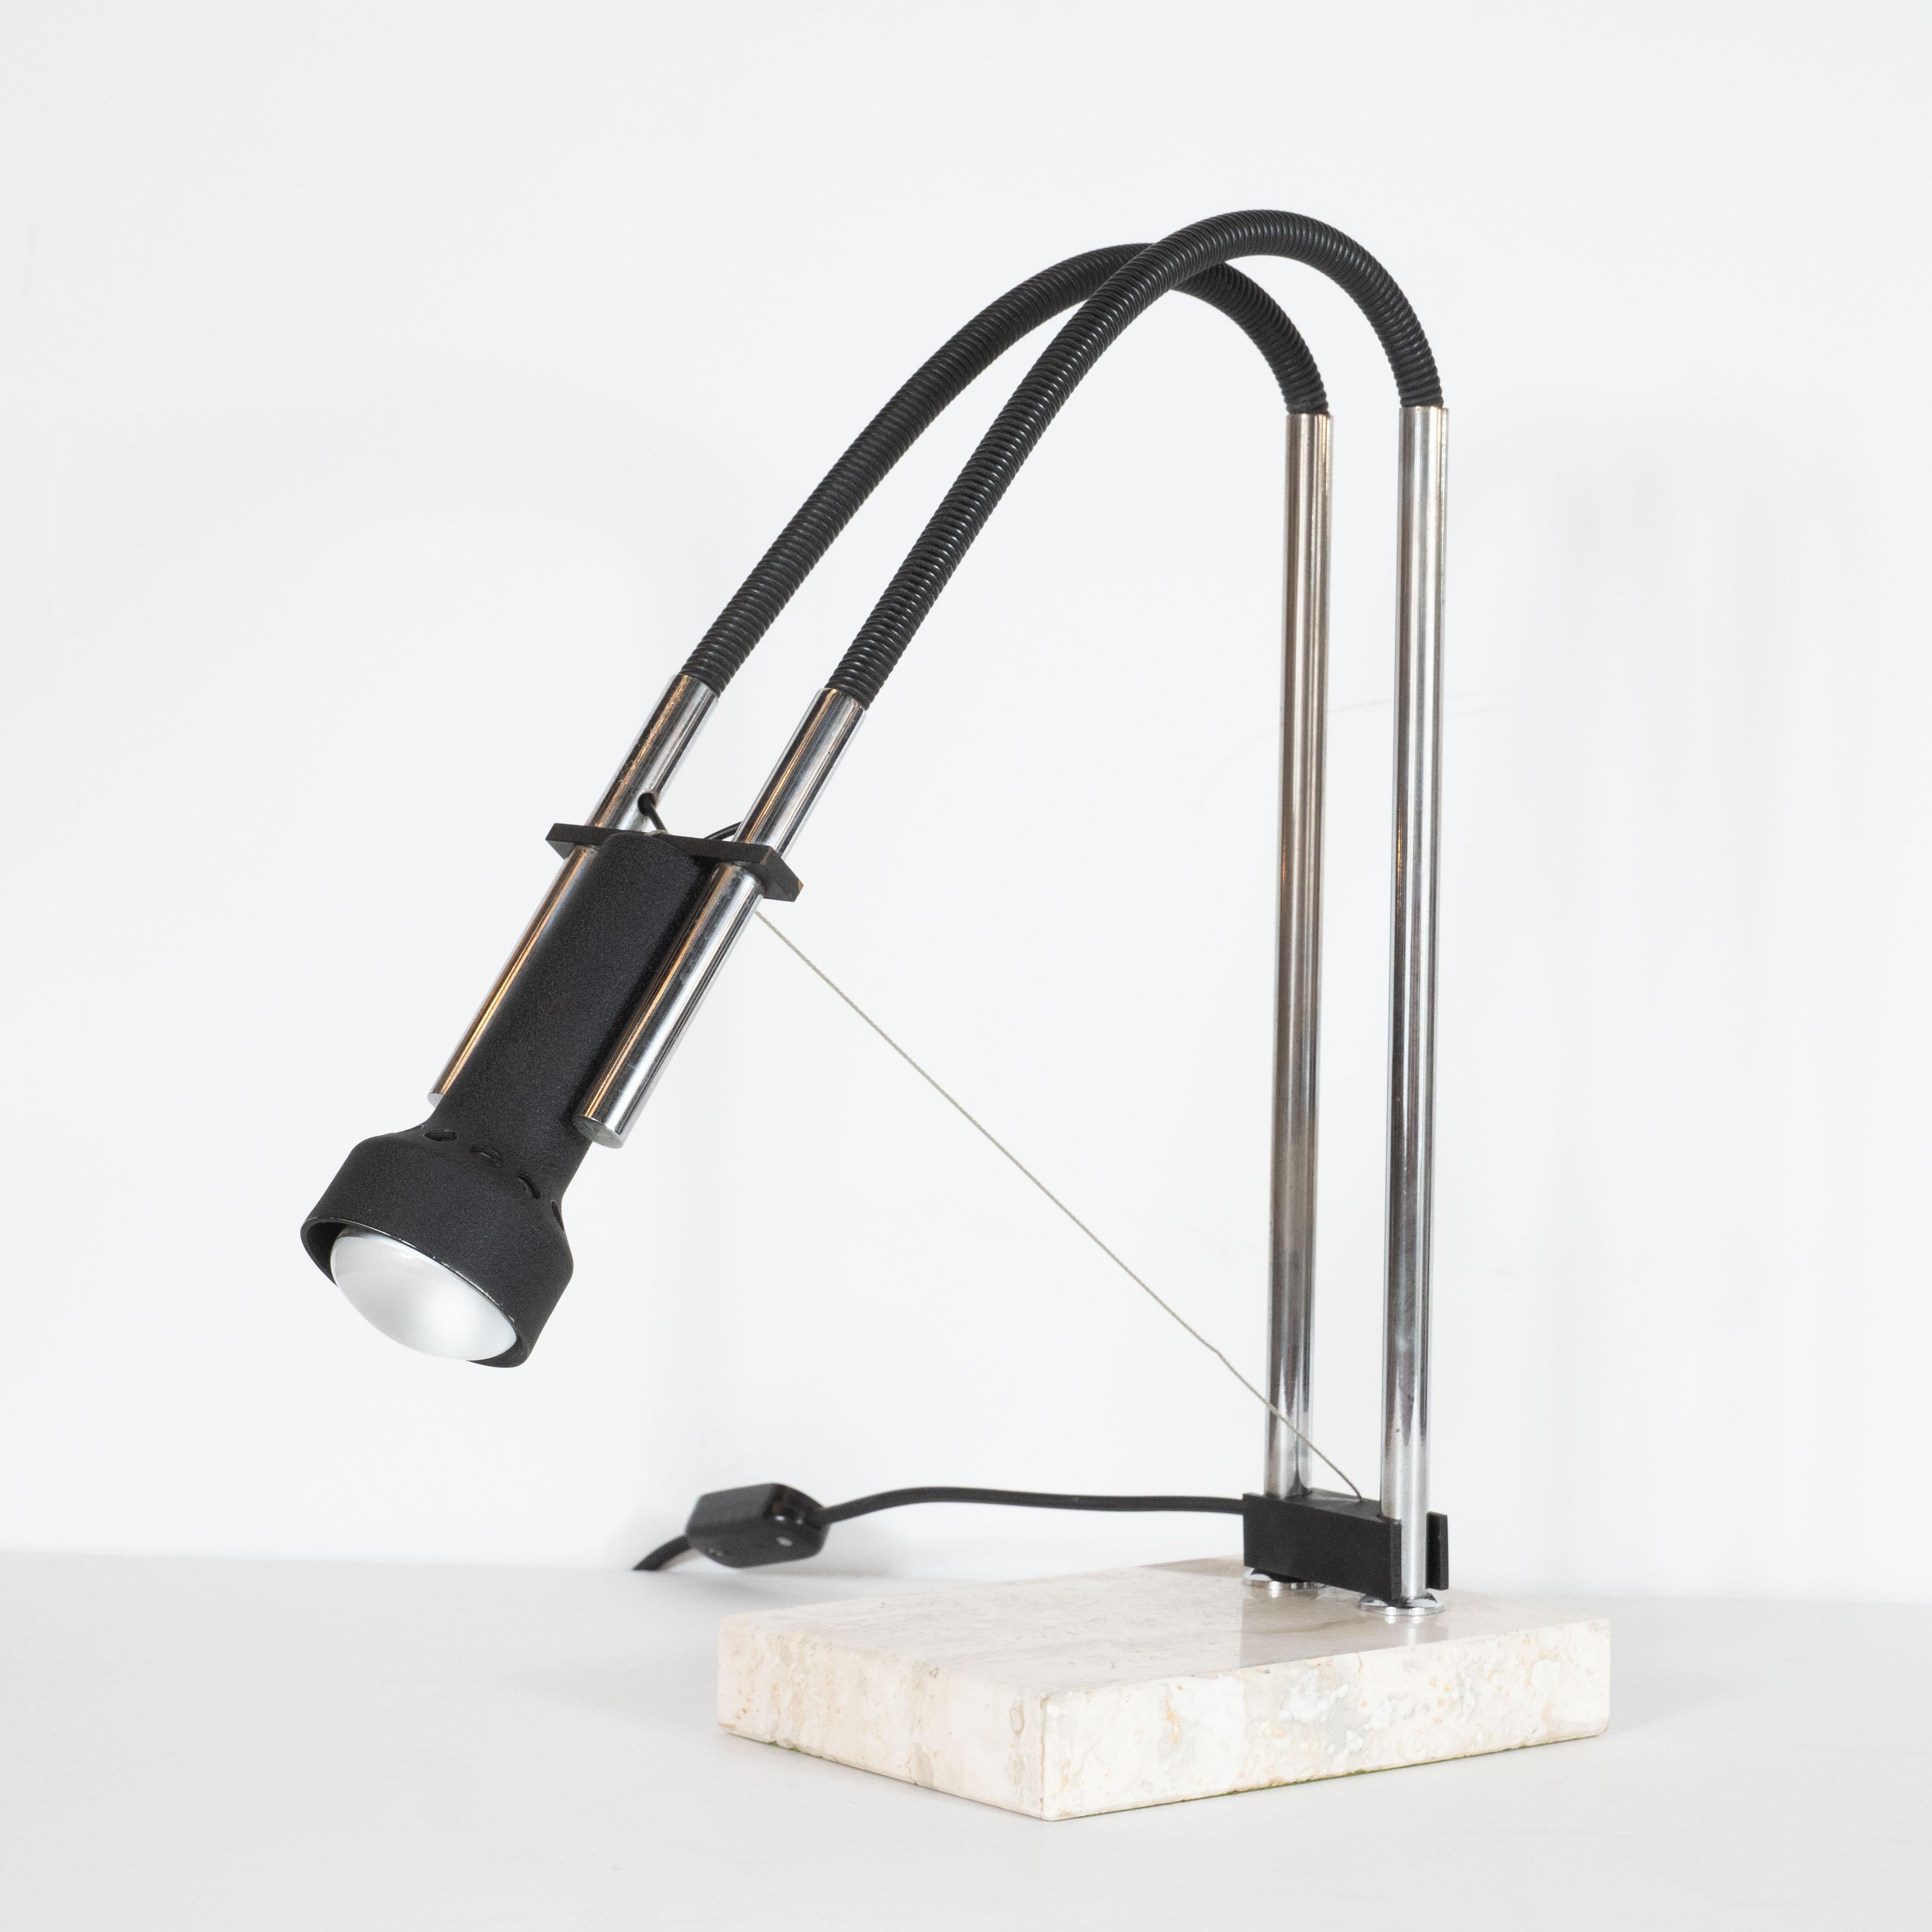 This sophisticated articulating table lamp was realized by influential post-war Italian lighting designer Angelo Lelii for Arredoluce, circa 1975. The lamp's single bulb is encased in a black enameled brass shade. This fixture is flanked by two